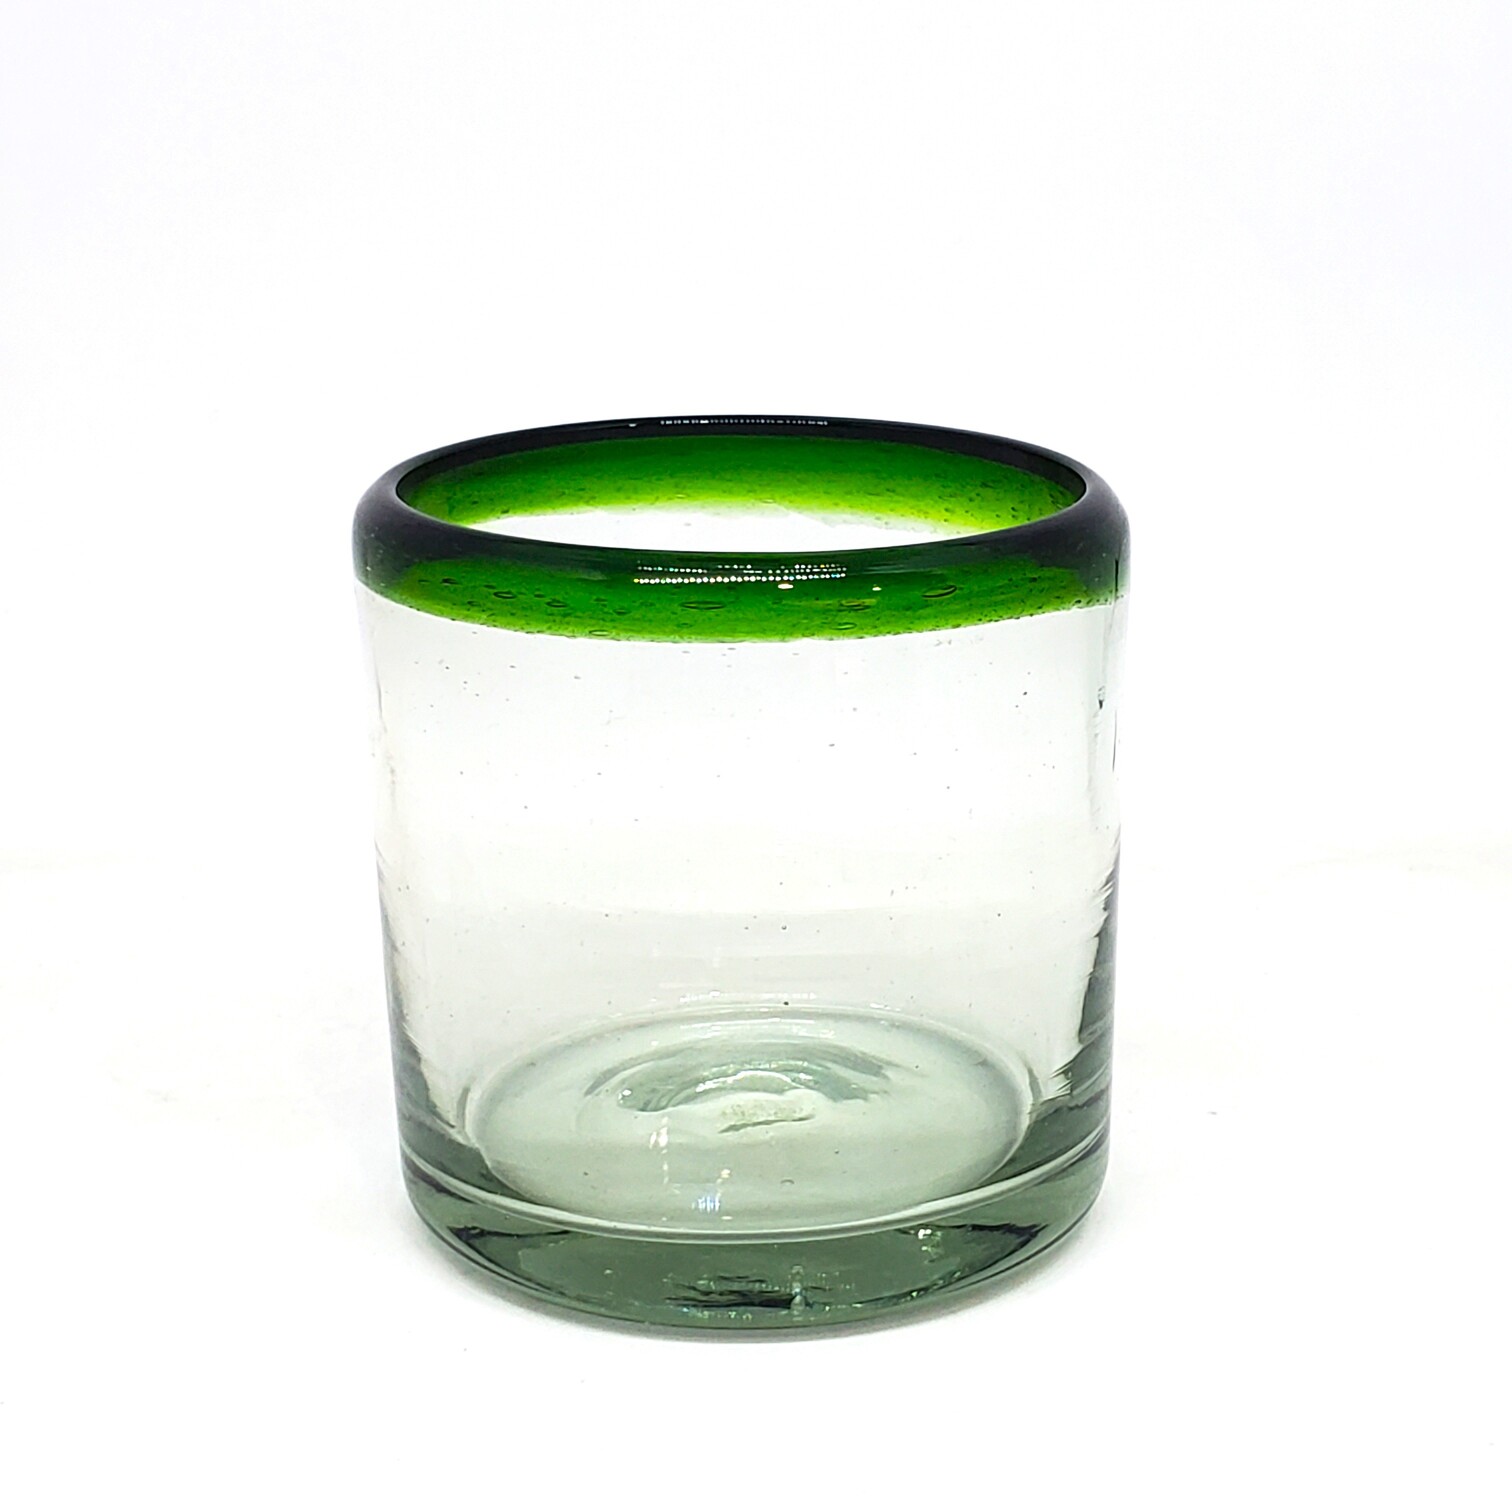 MEXICAN GLASSWARE / Emerald Green Rim 8 oz DOF Rock Glasses (set of 6) / These Double Old Fashioned glasses deliver a classic touch to your favorite drink on the rocks.